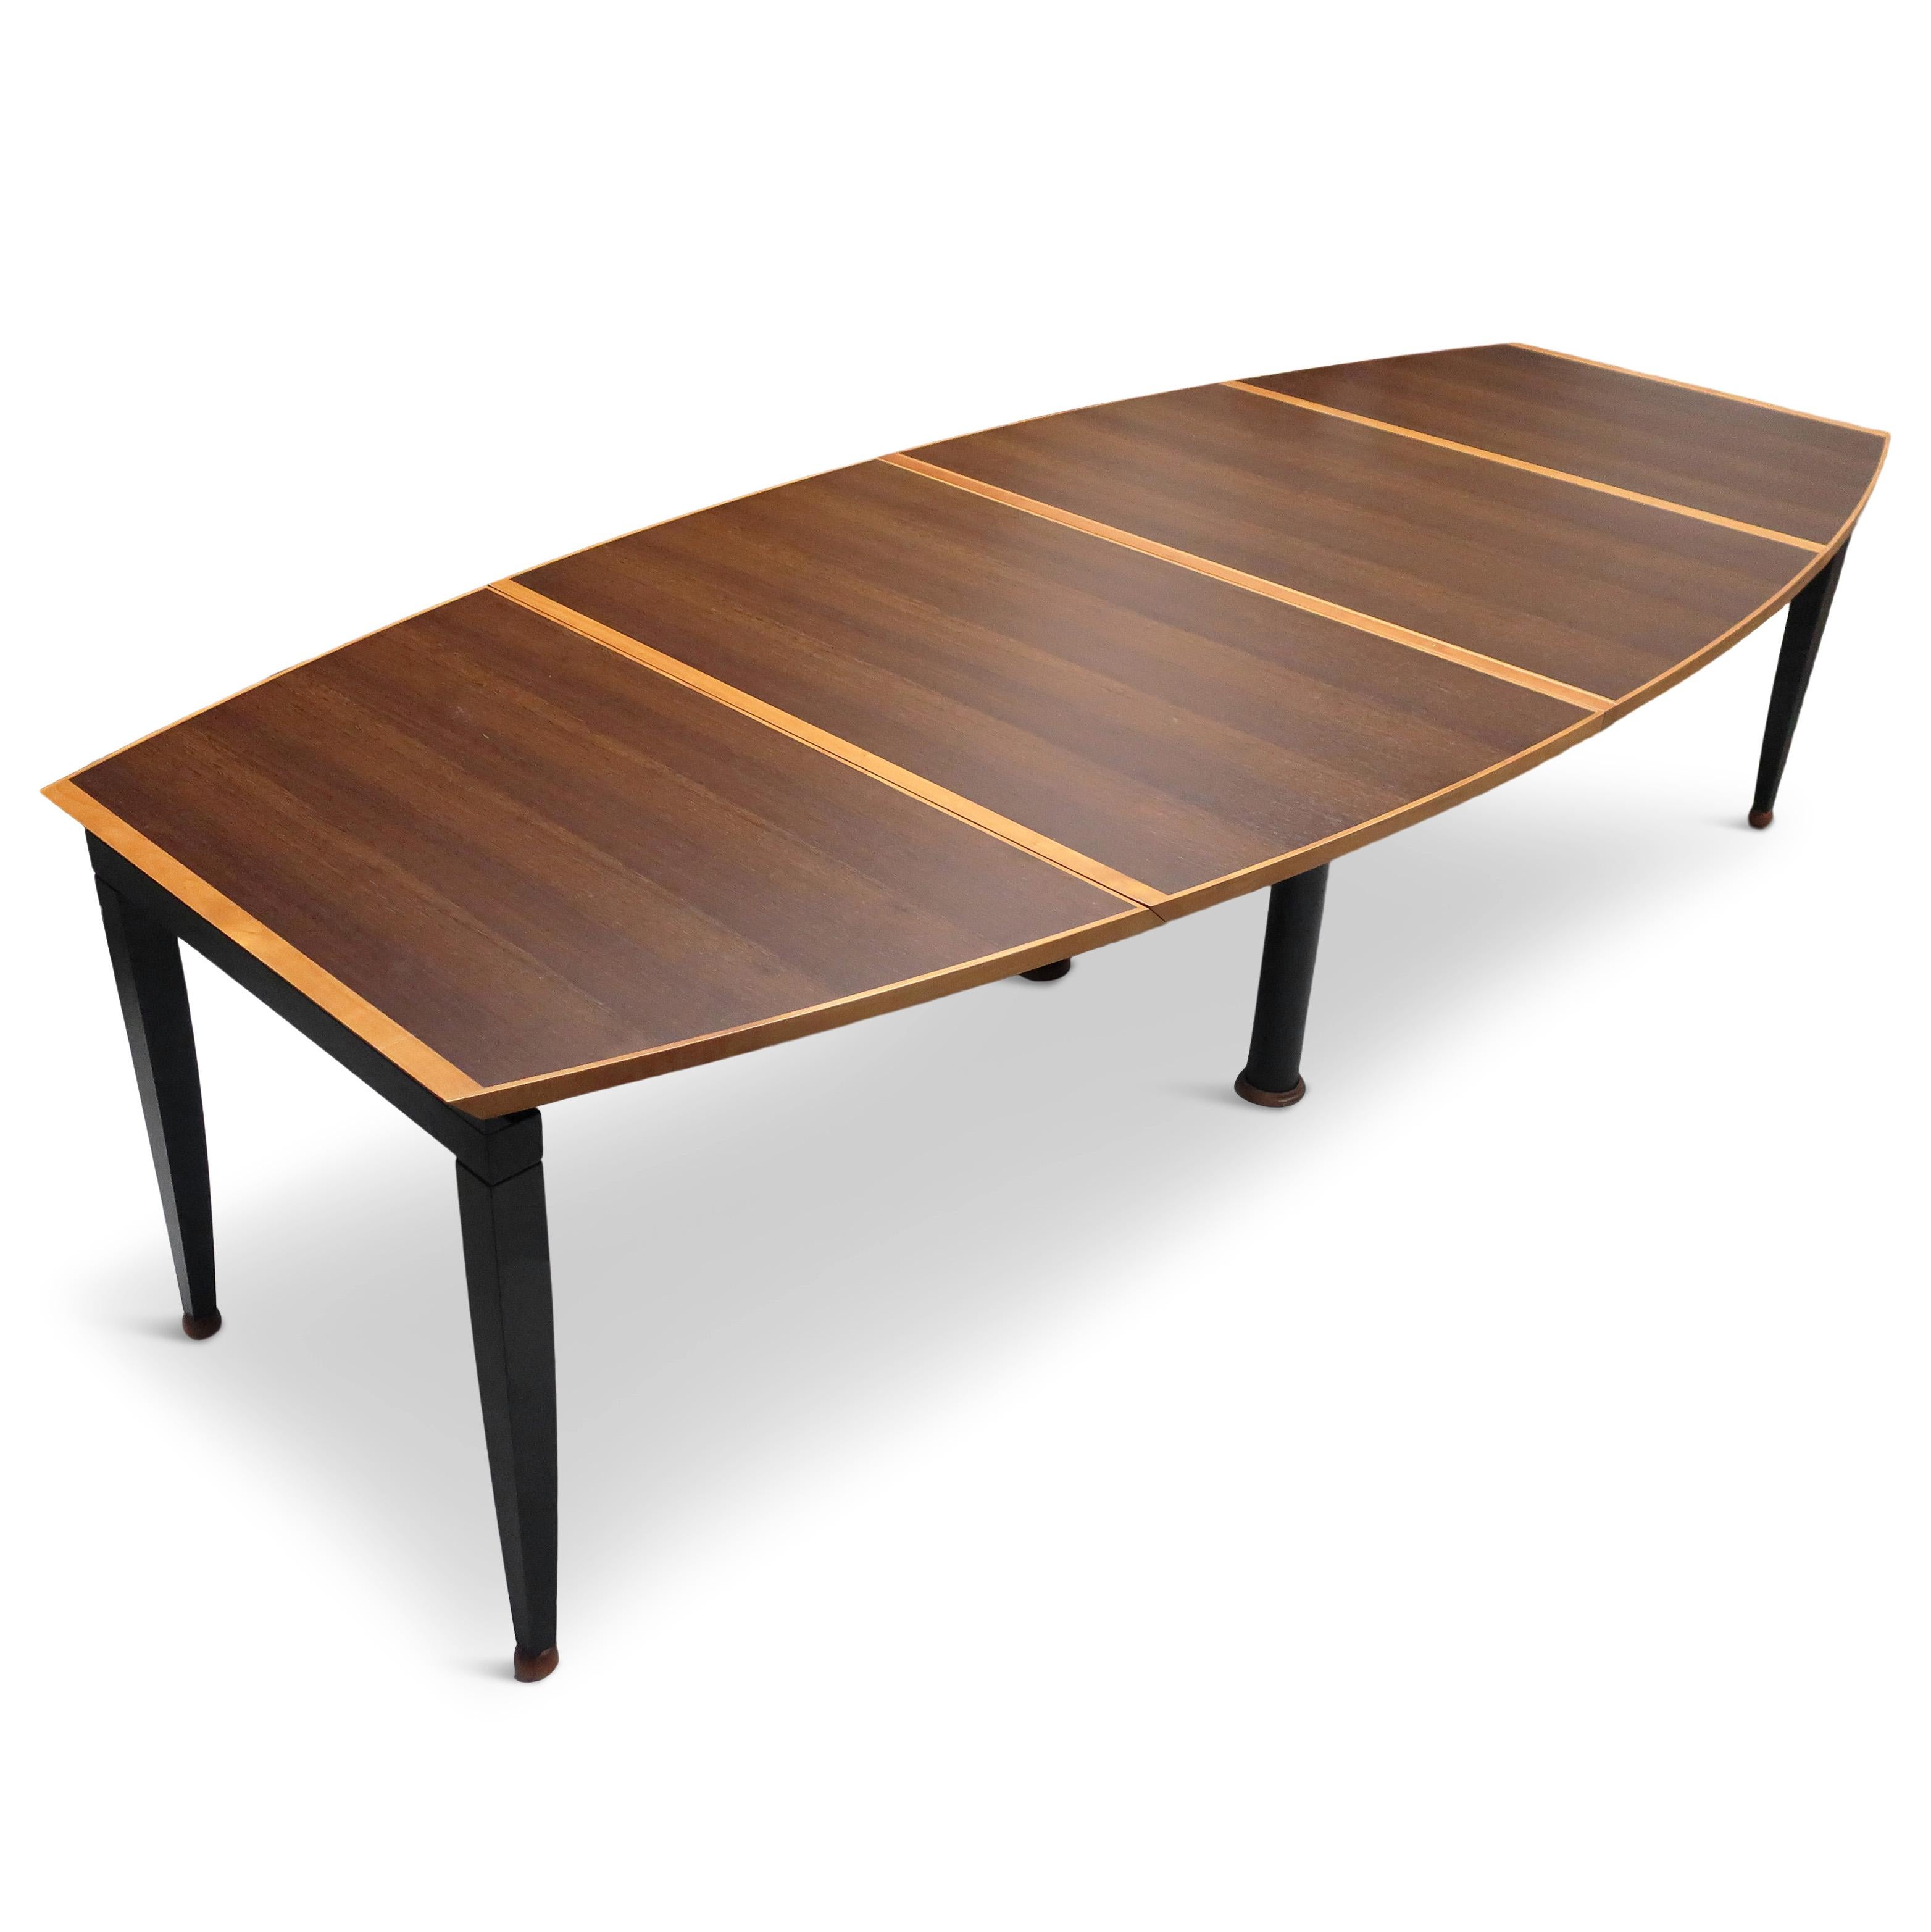 20th Century Tabula Magna Dining Table by Oscar Tosquets Blanca for Driade Aleph, '1991' For Sale